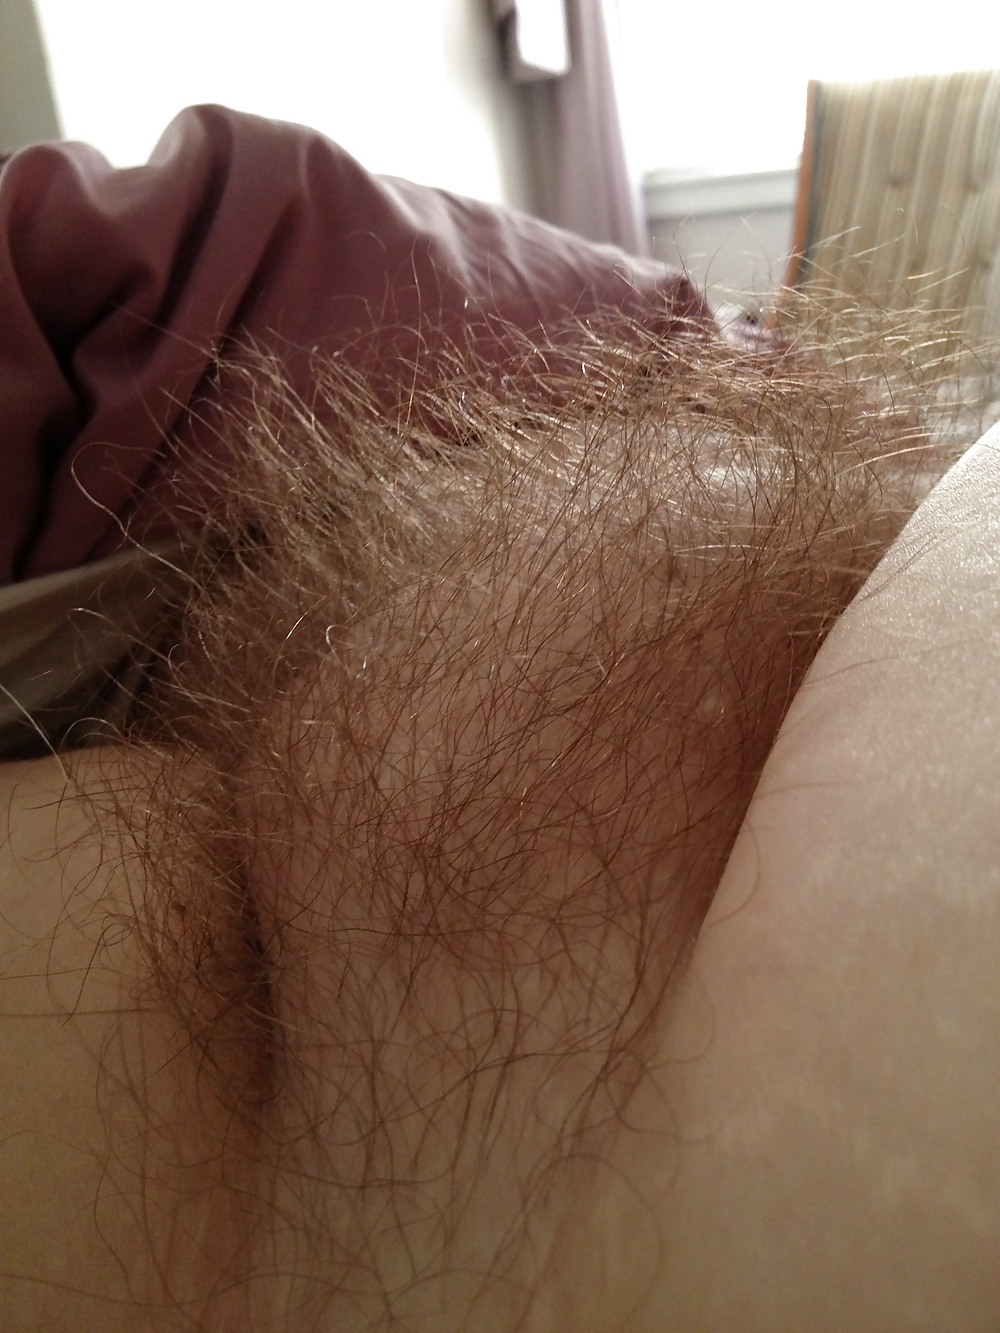 My bbw with hairy pussy and big titts. #14486786